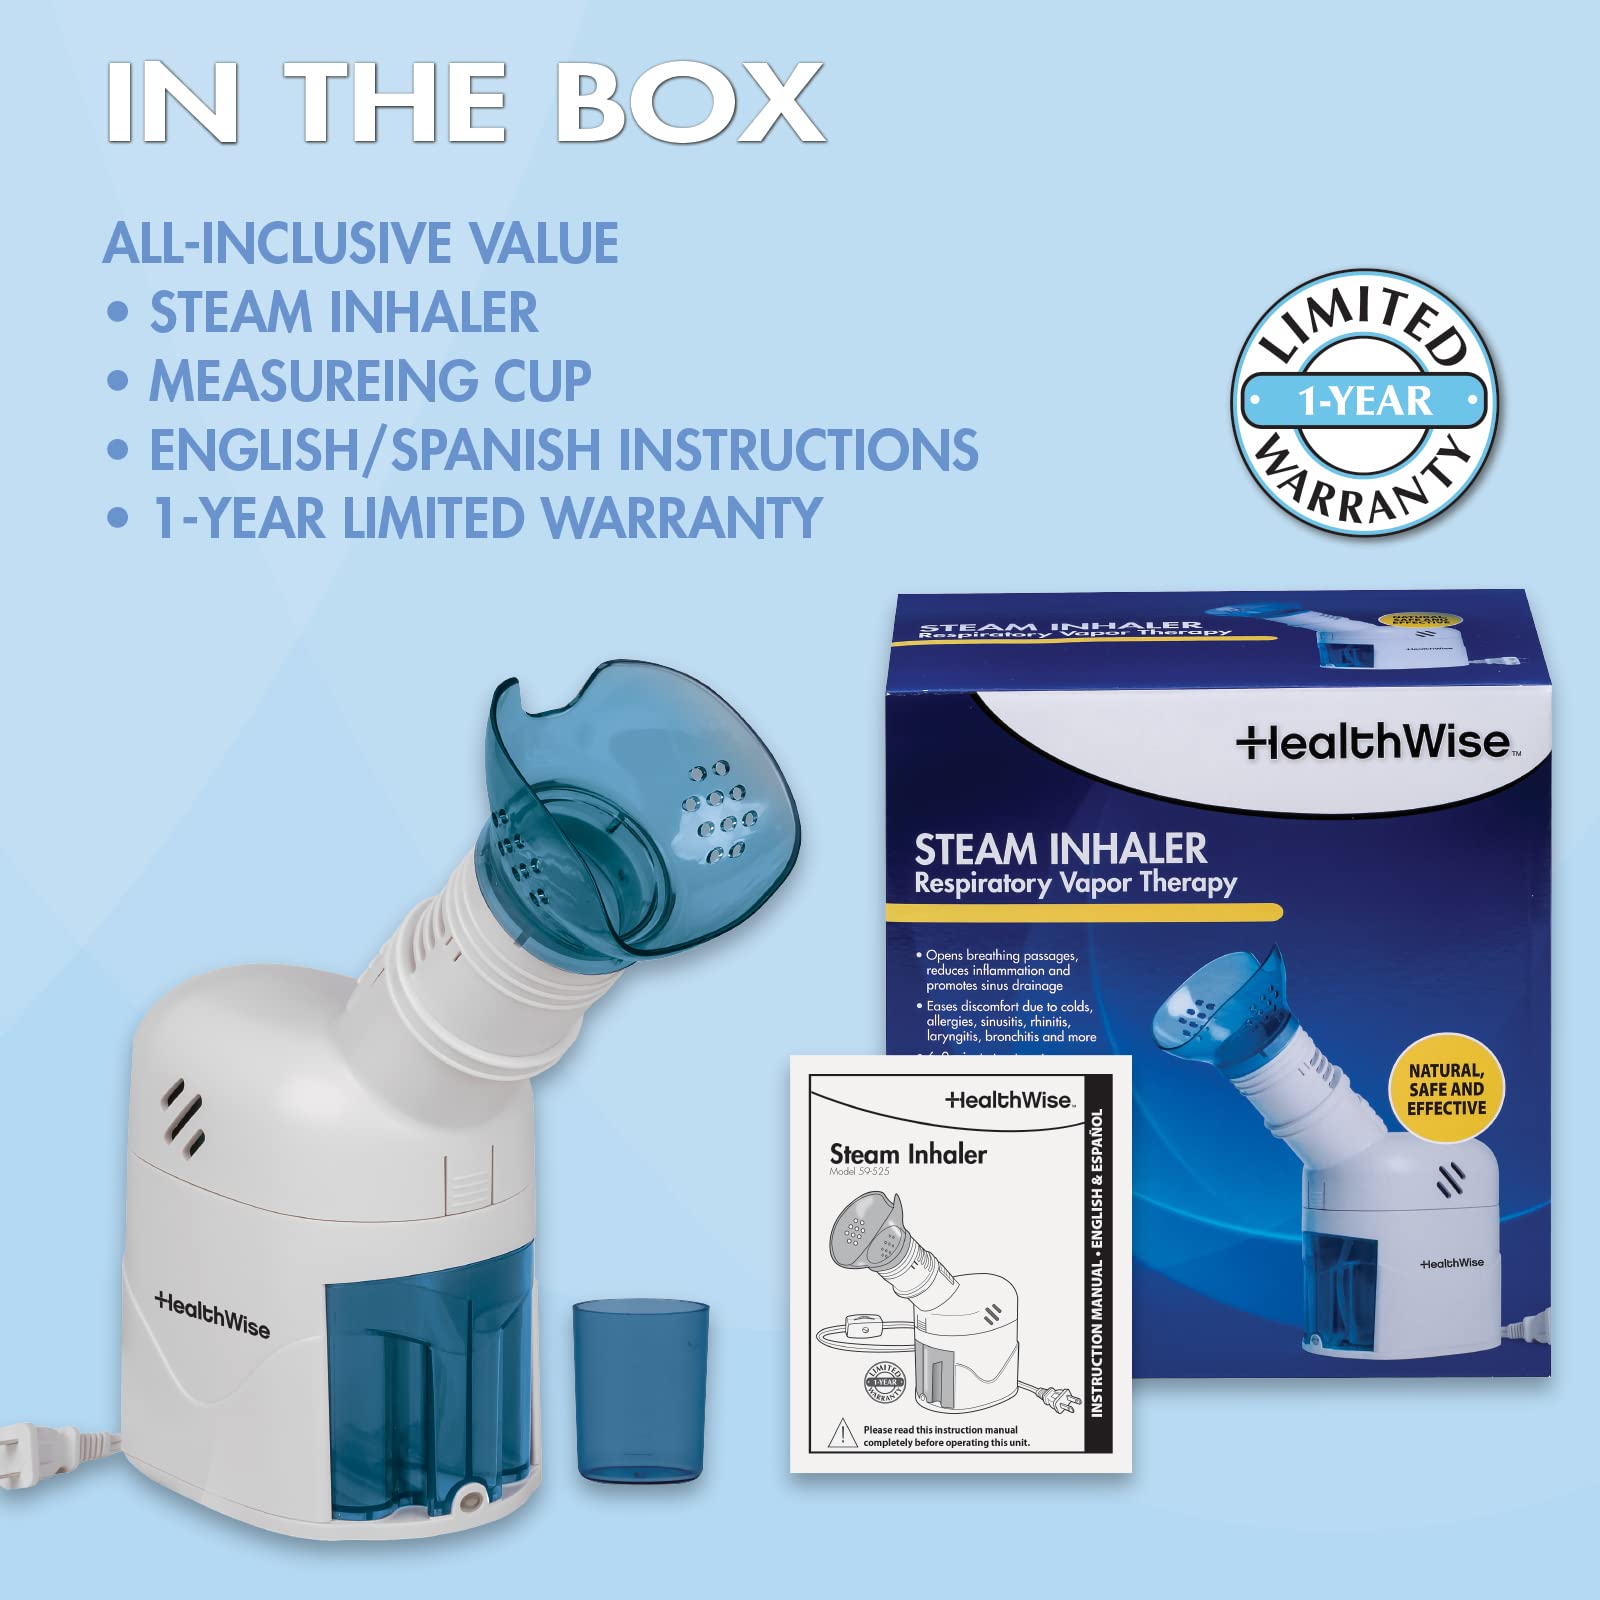 HealthWise Steam Inhaler Respiratory Vapor Therapy | Sinus Pressure, Congestion, Colds & Cough Relief | Mask for Cleansing